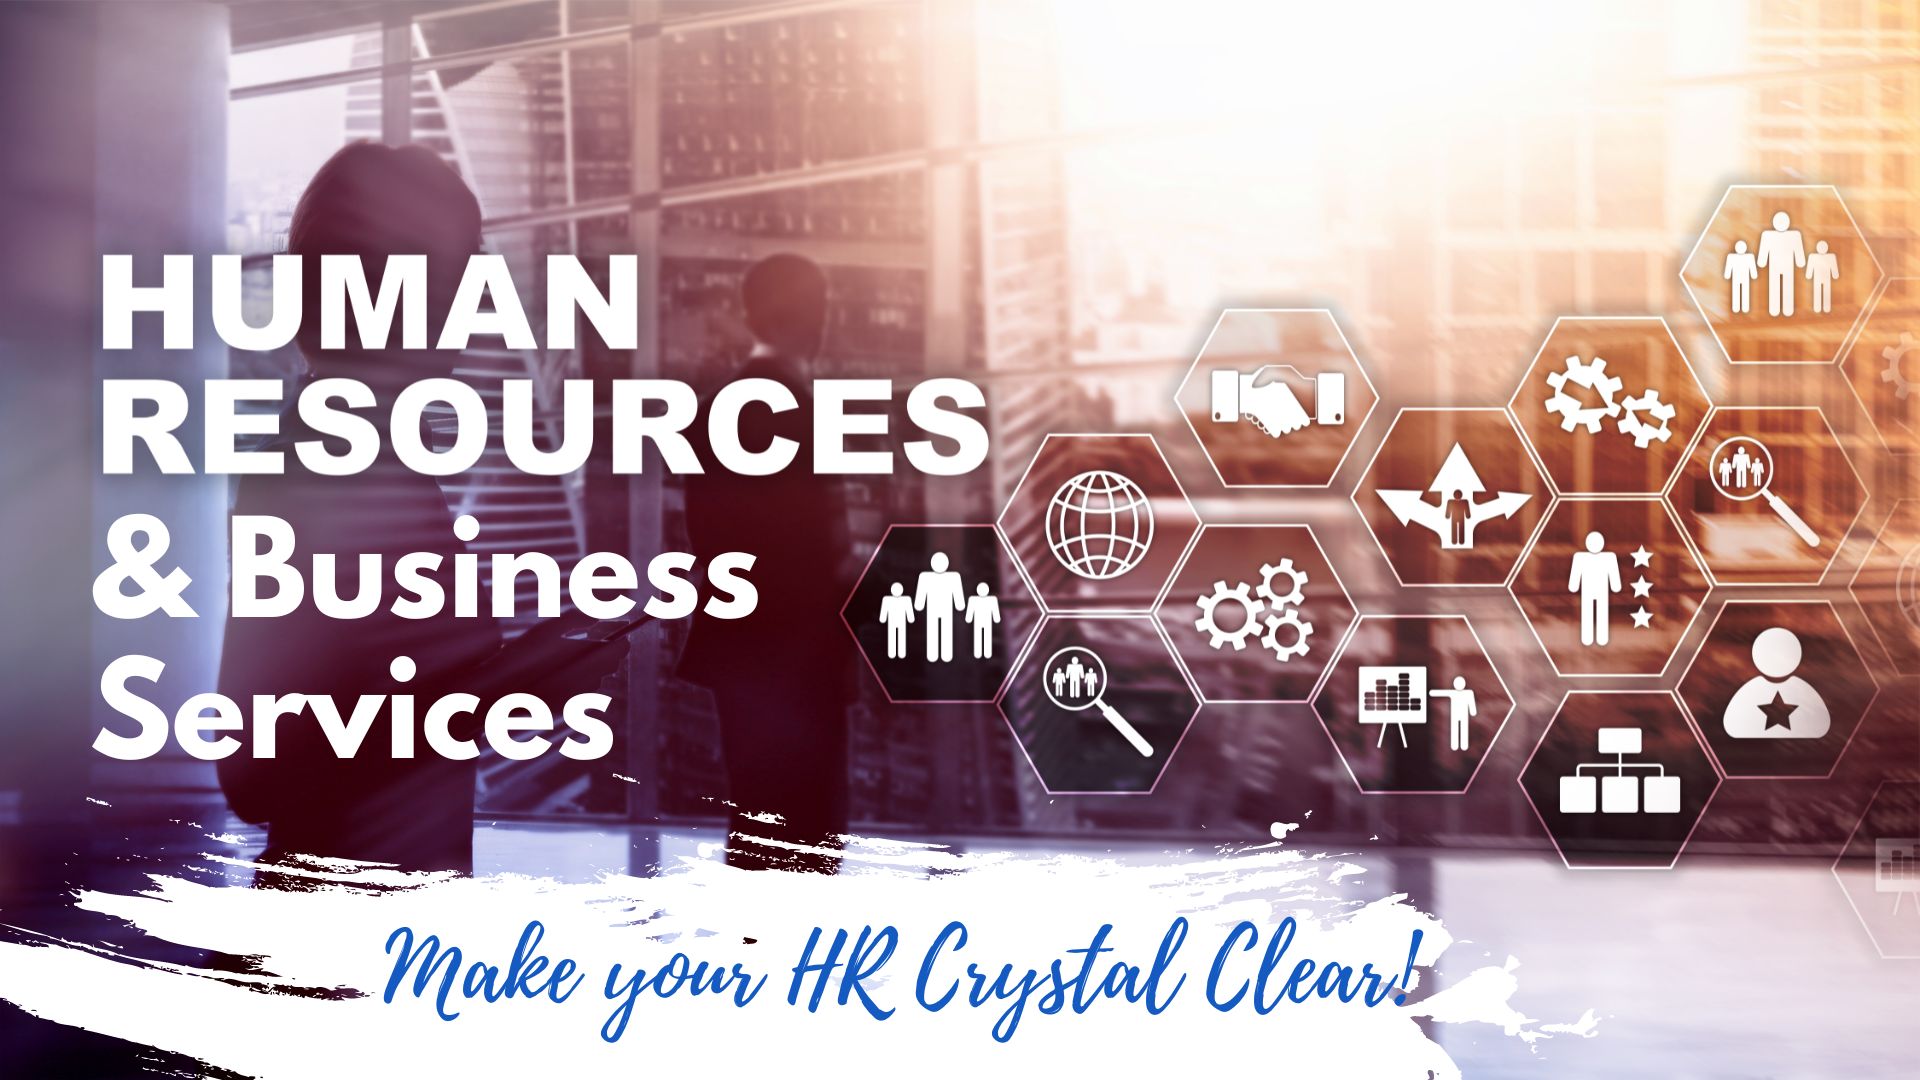 Make your HR Crystal Clear